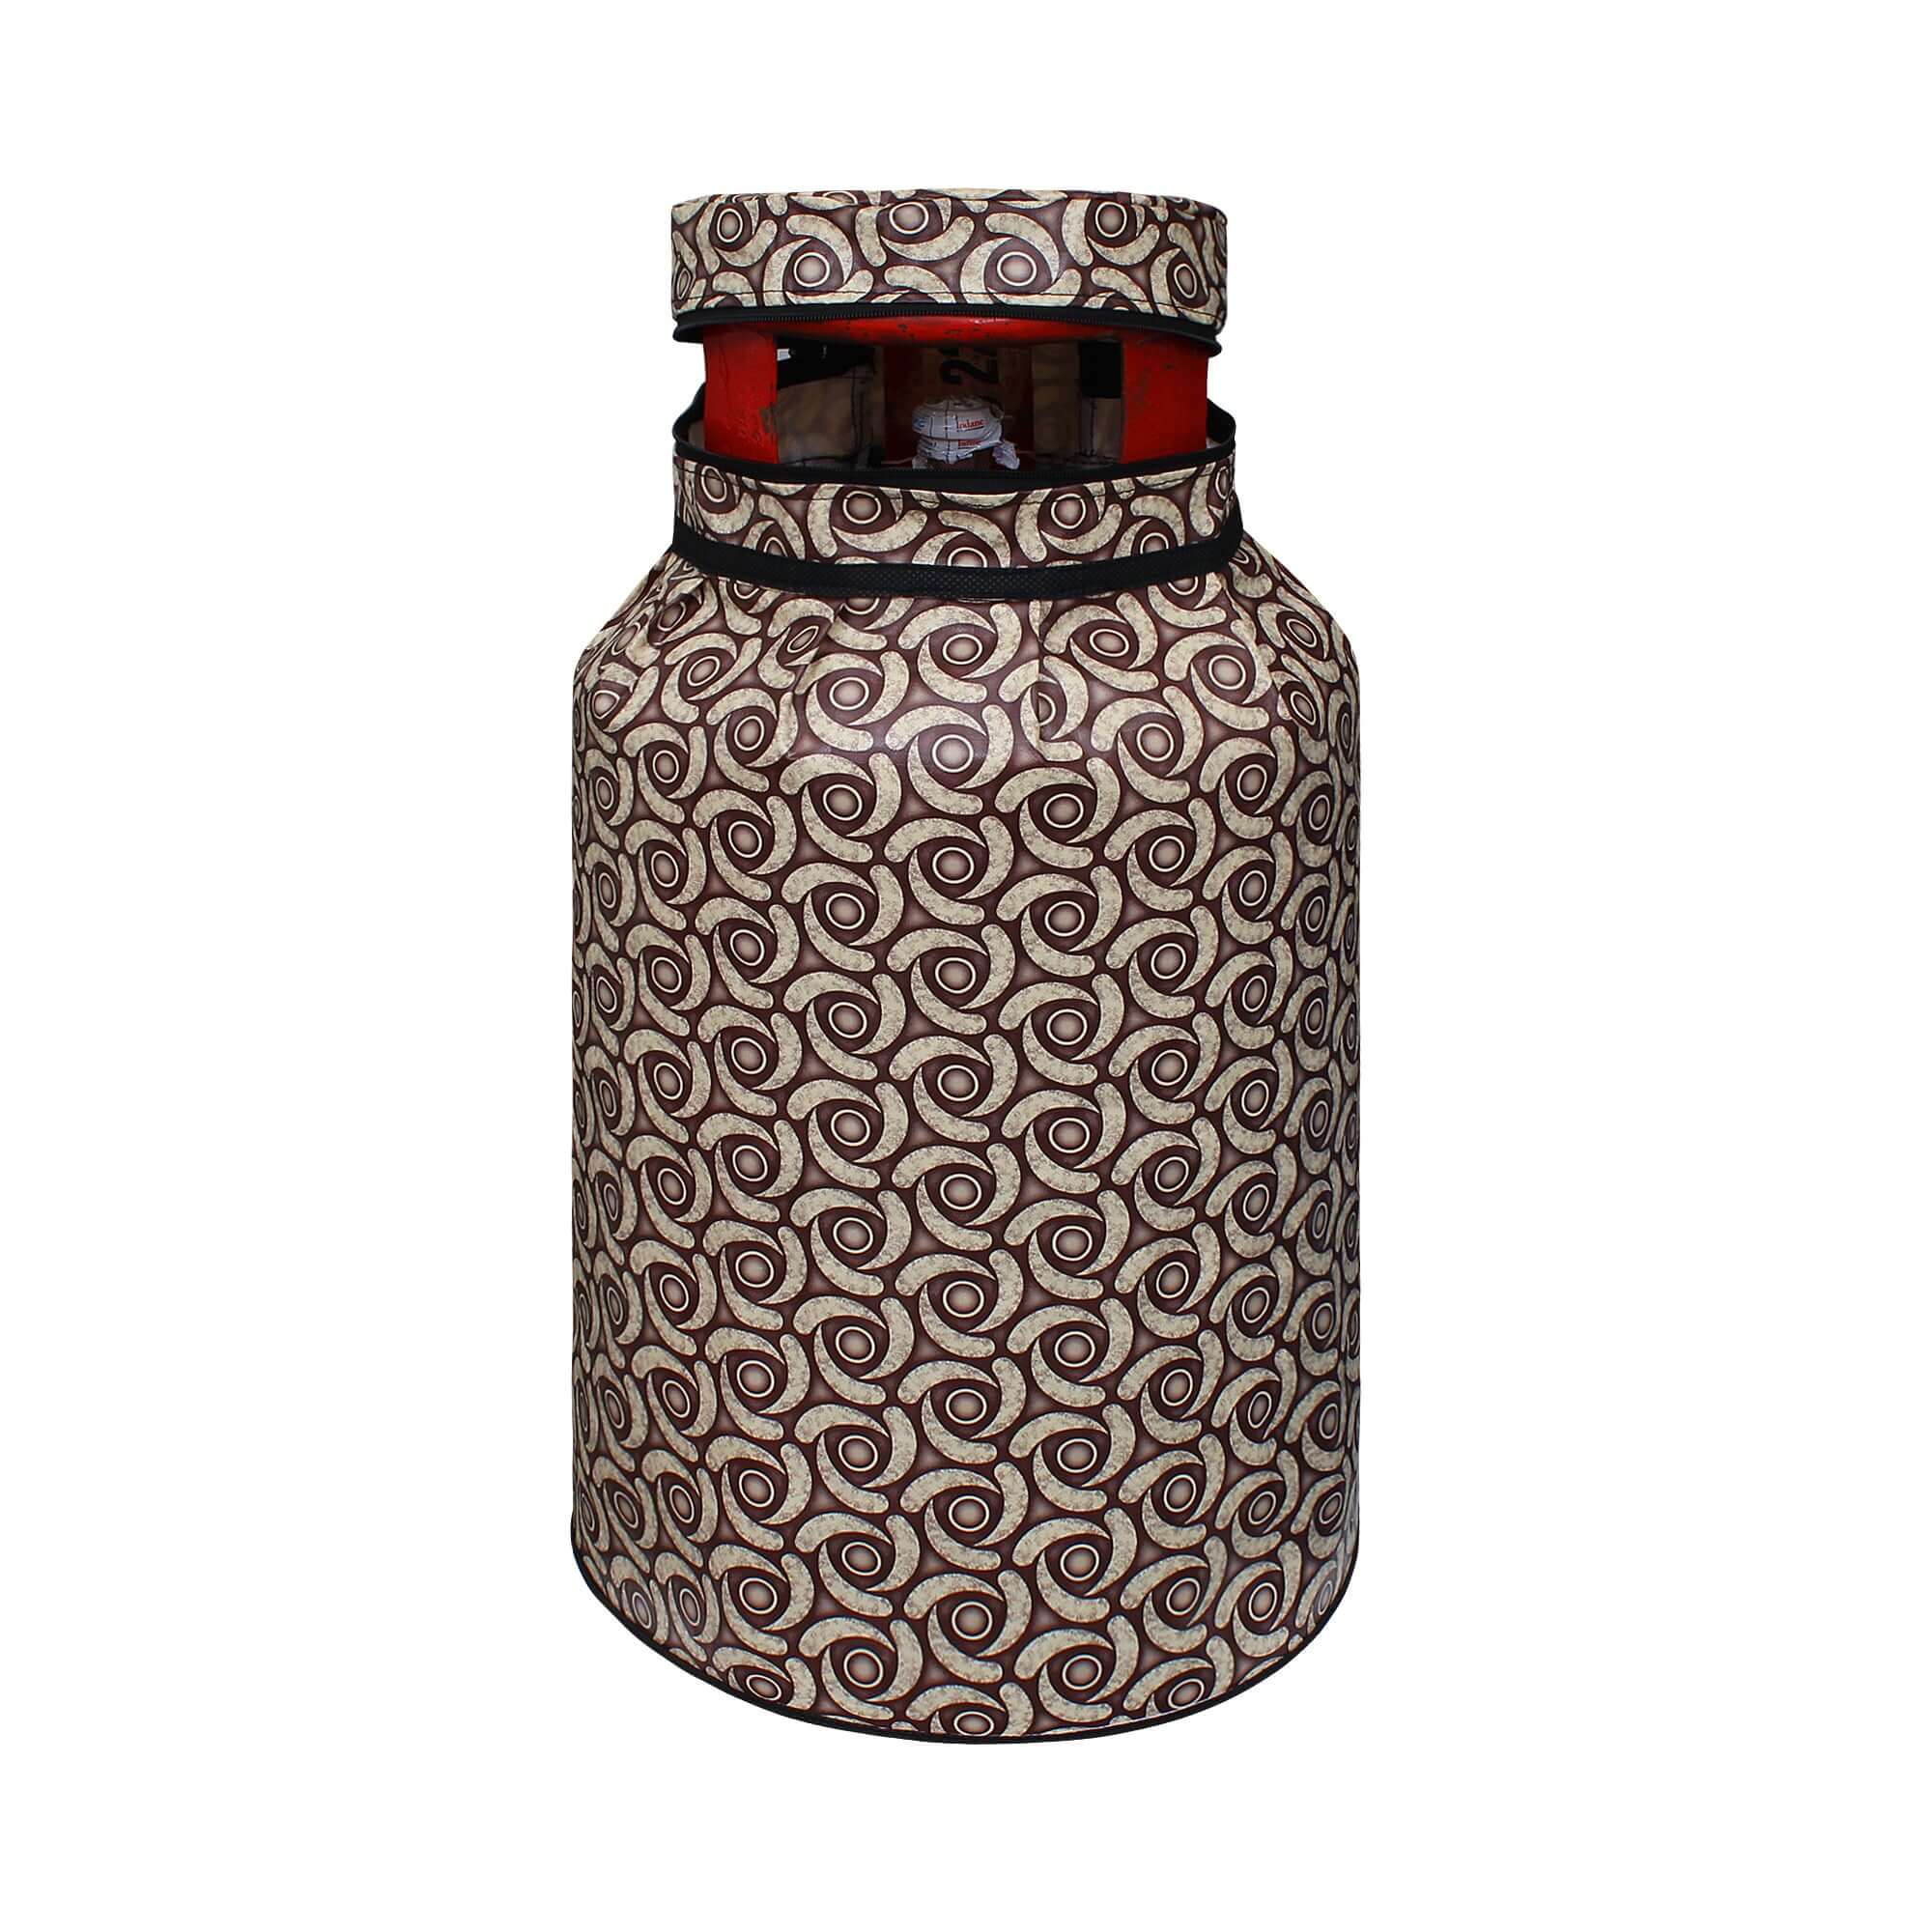 LPG Gas Cylinder Cover, SA58 - Dream Care Furnishings Private Limited